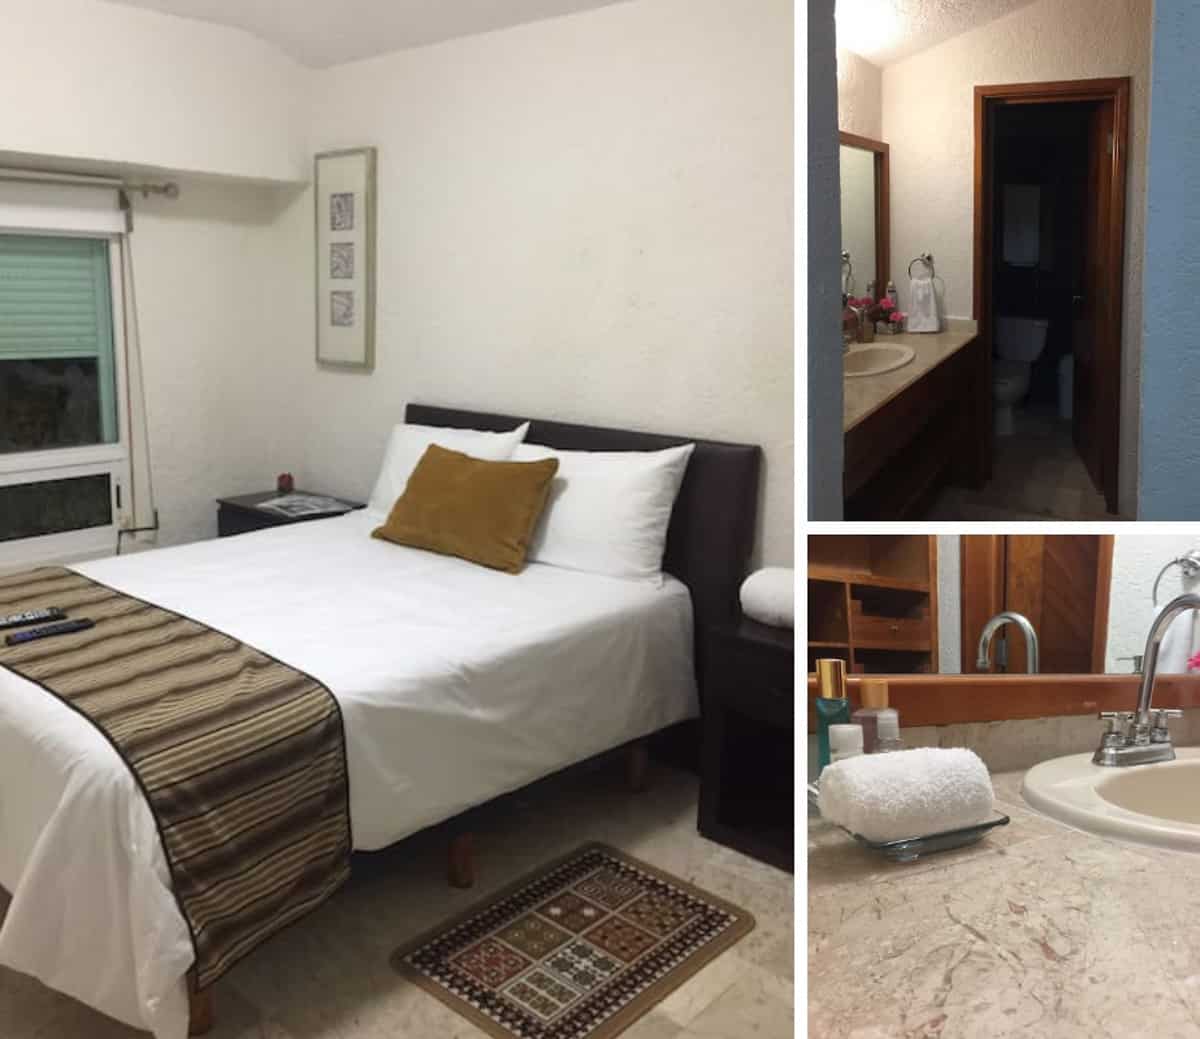 3 images of a bedroom in Cancun Airbnb